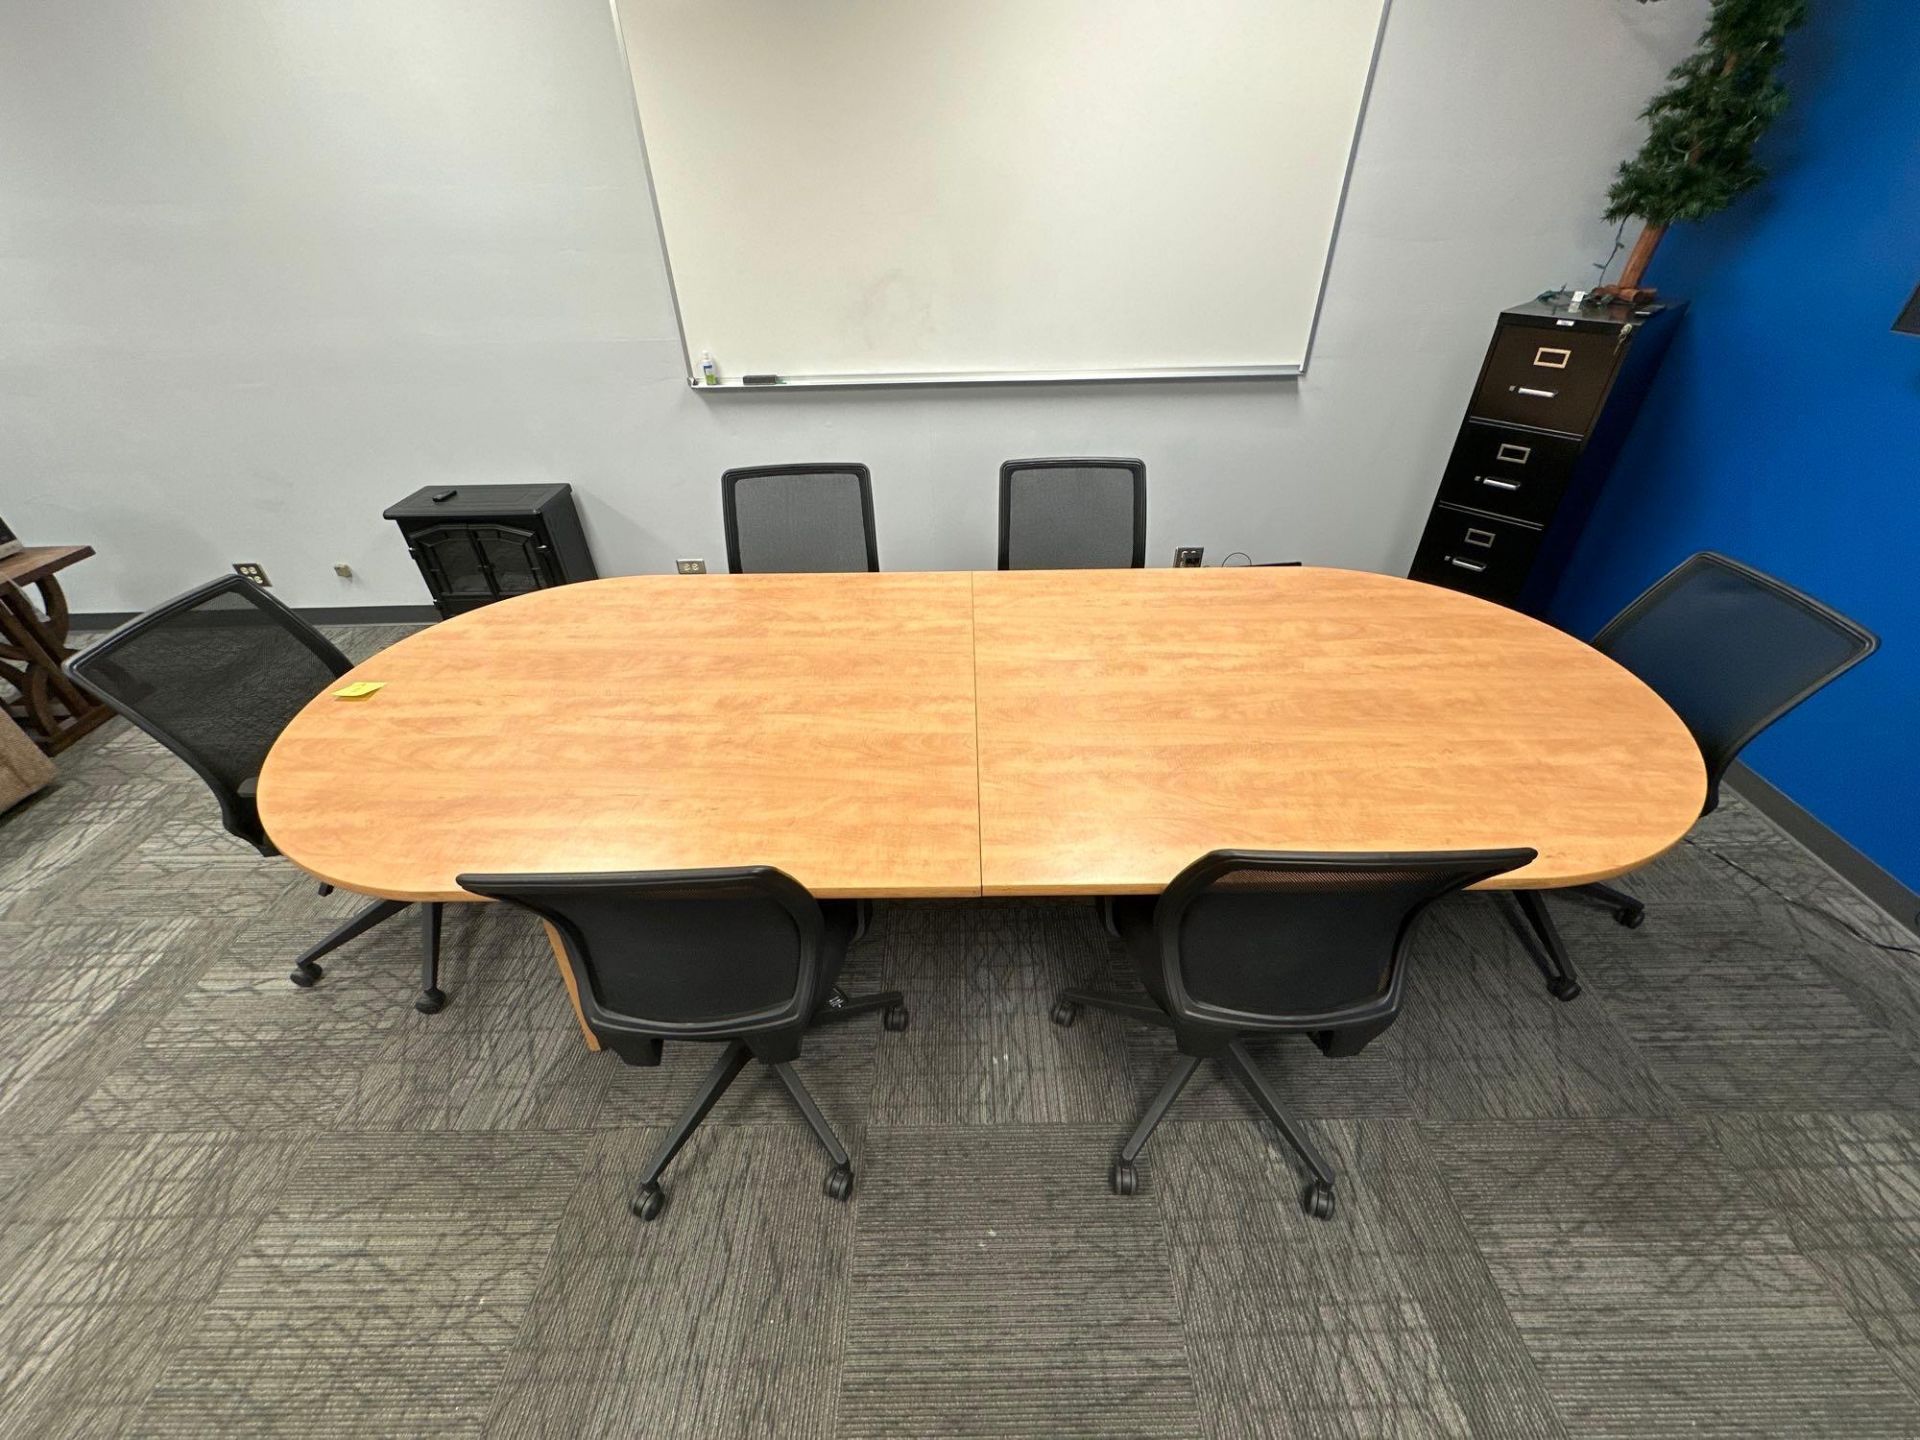 CONFERENCE ROOM TABLE WITH 6 ROLLING CHAIRS - Image 2 of 3